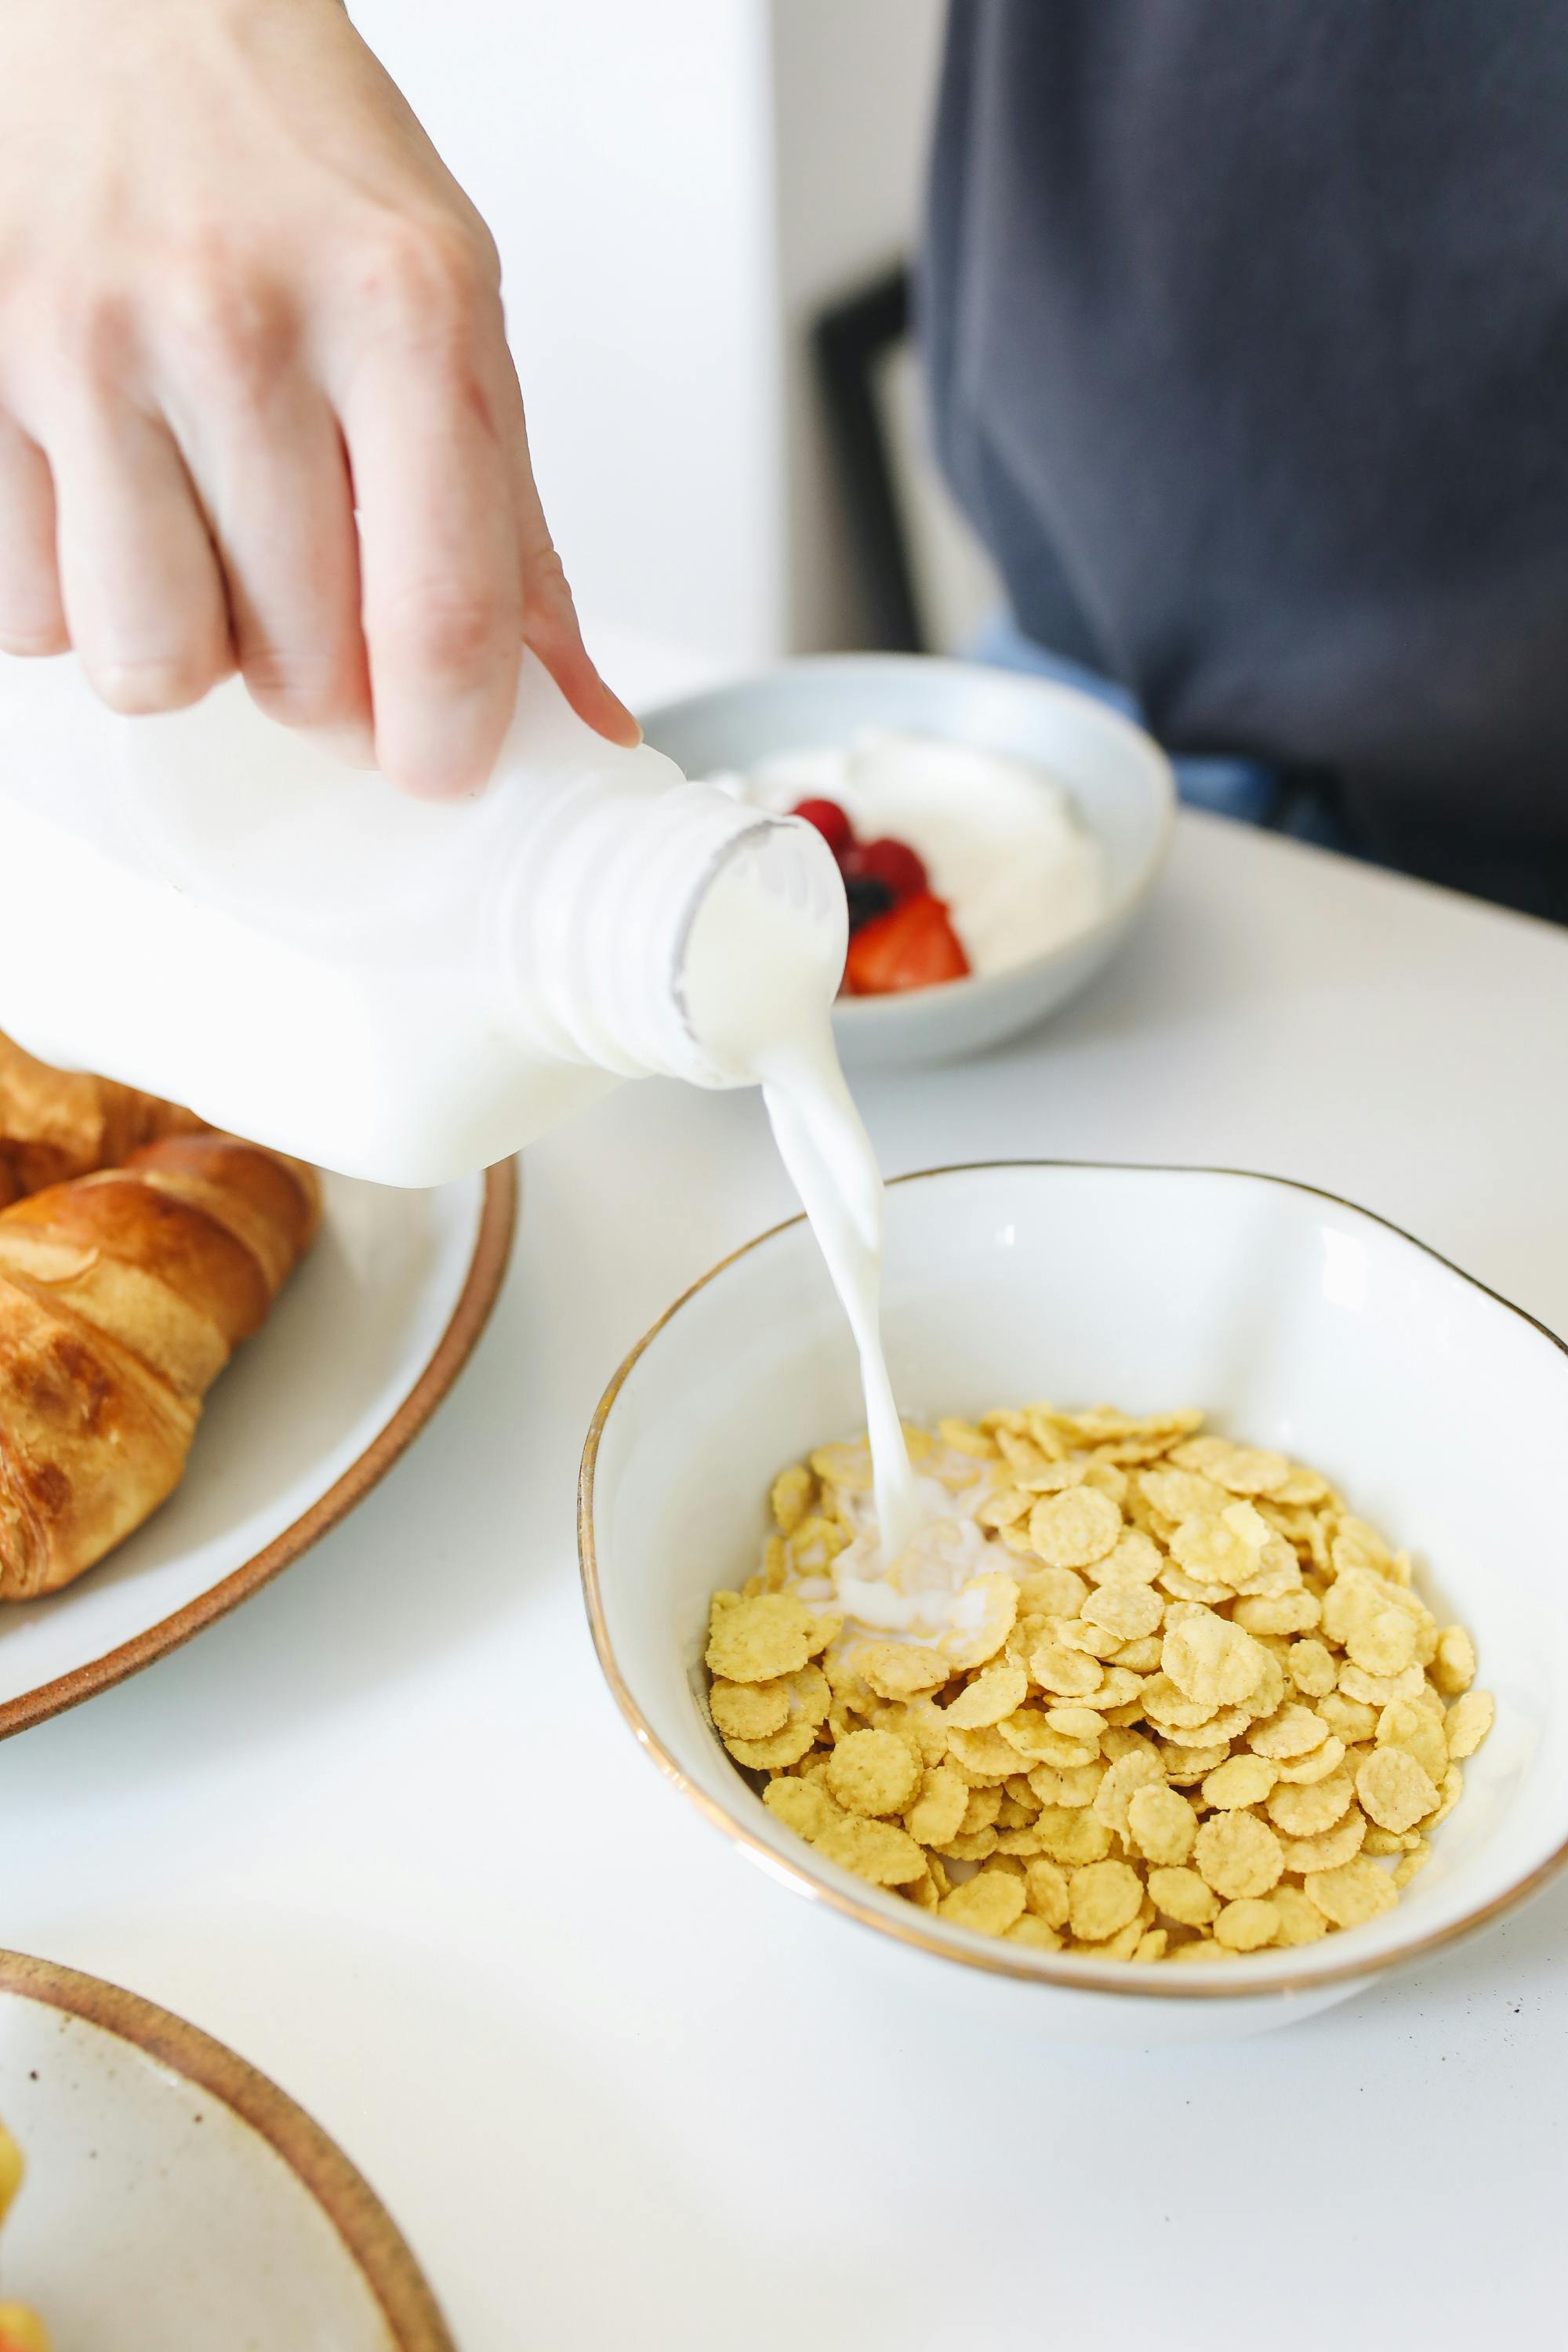 Breakfast Cereal with Milk Pour Stock Image - Image of morning